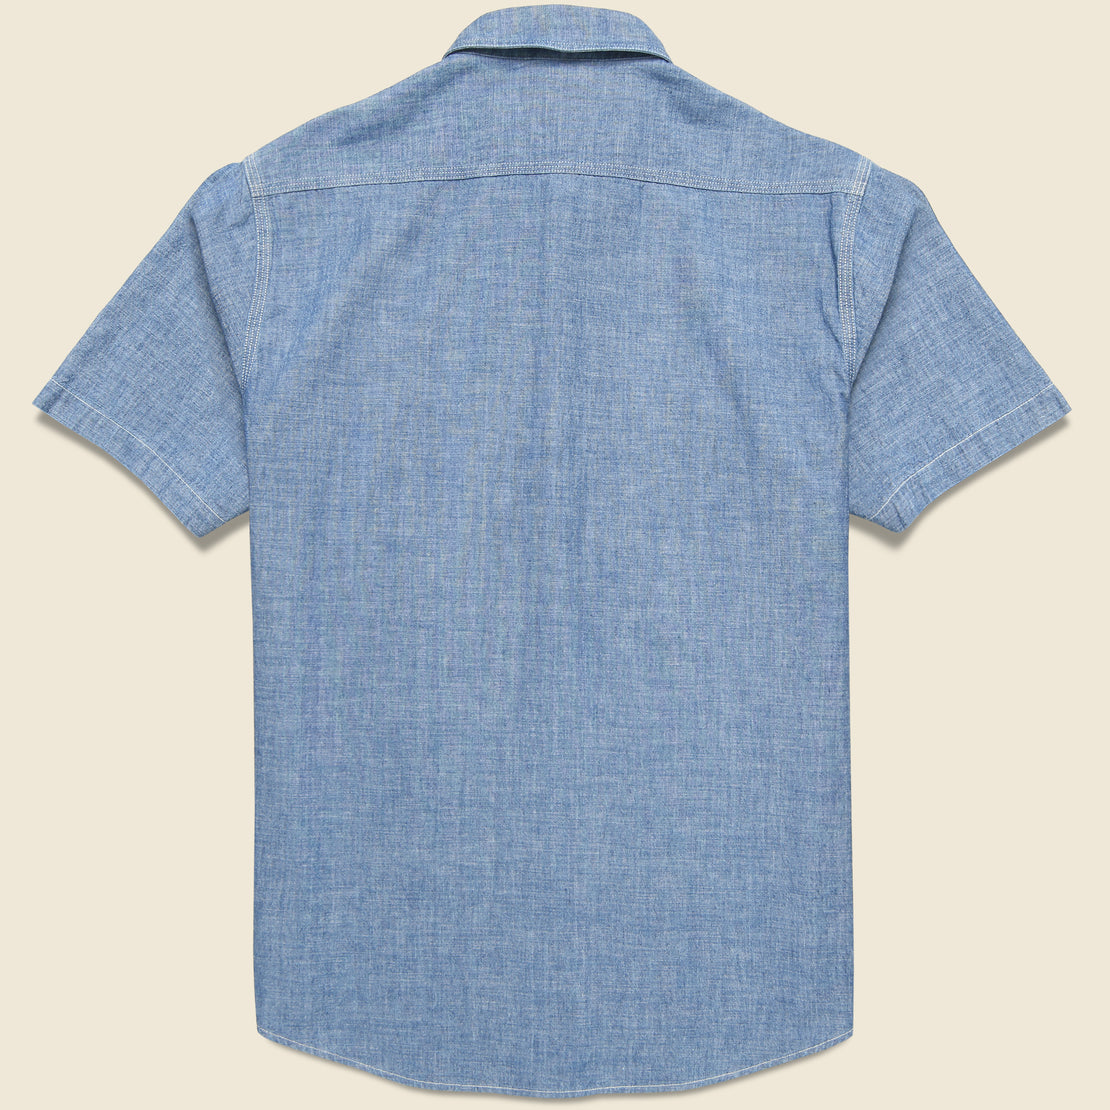 Craftsman Workshirt - Indigo - RRL - STAG Provisions - Tops - S/S Woven - Solid